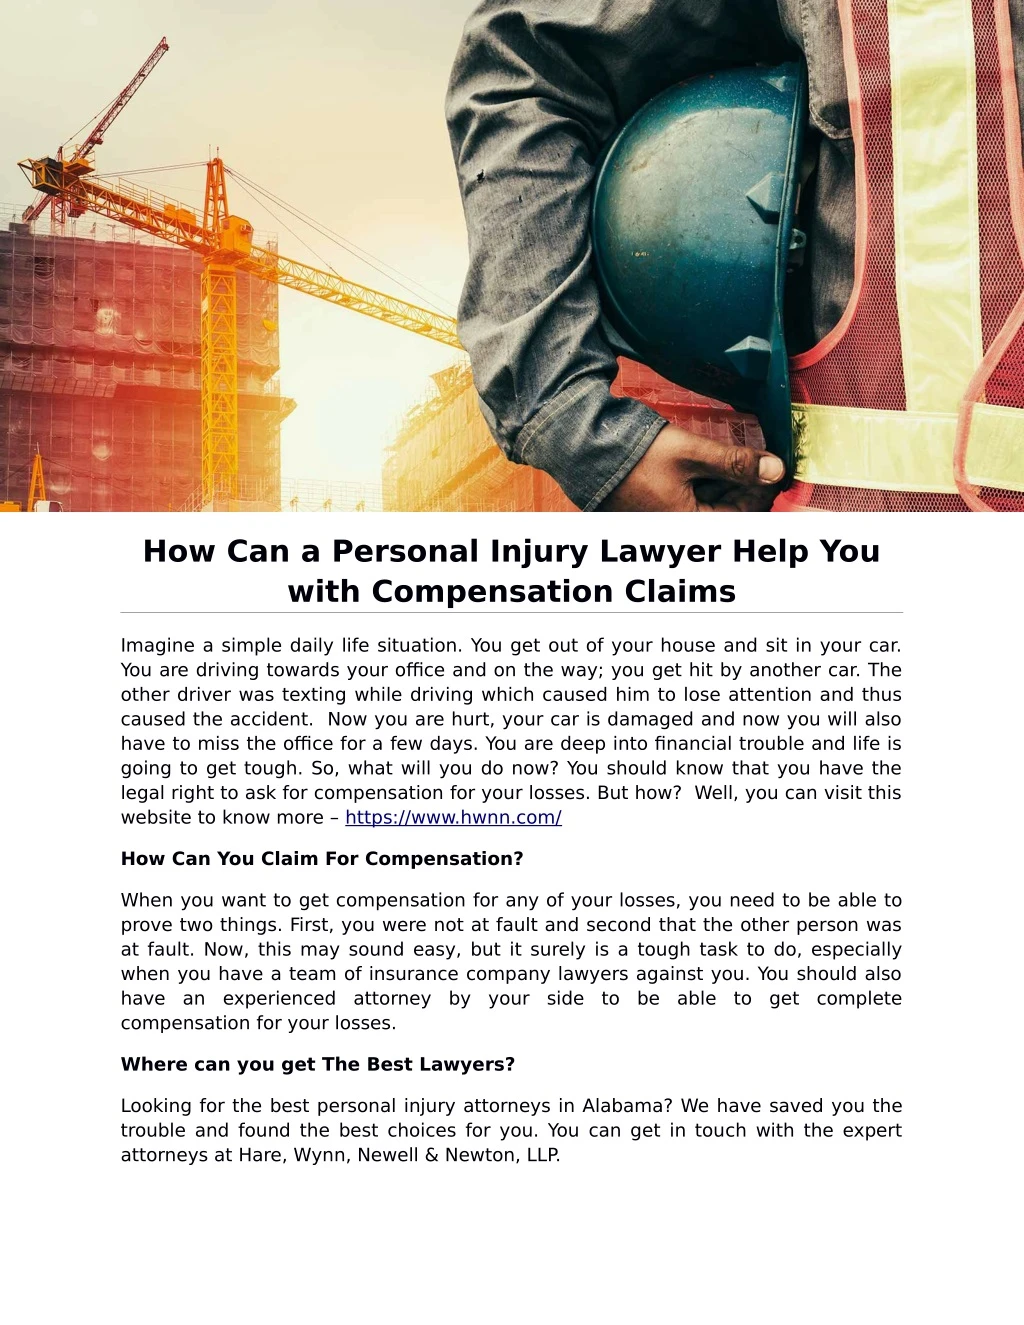 how can a personal injury lawyer help you with